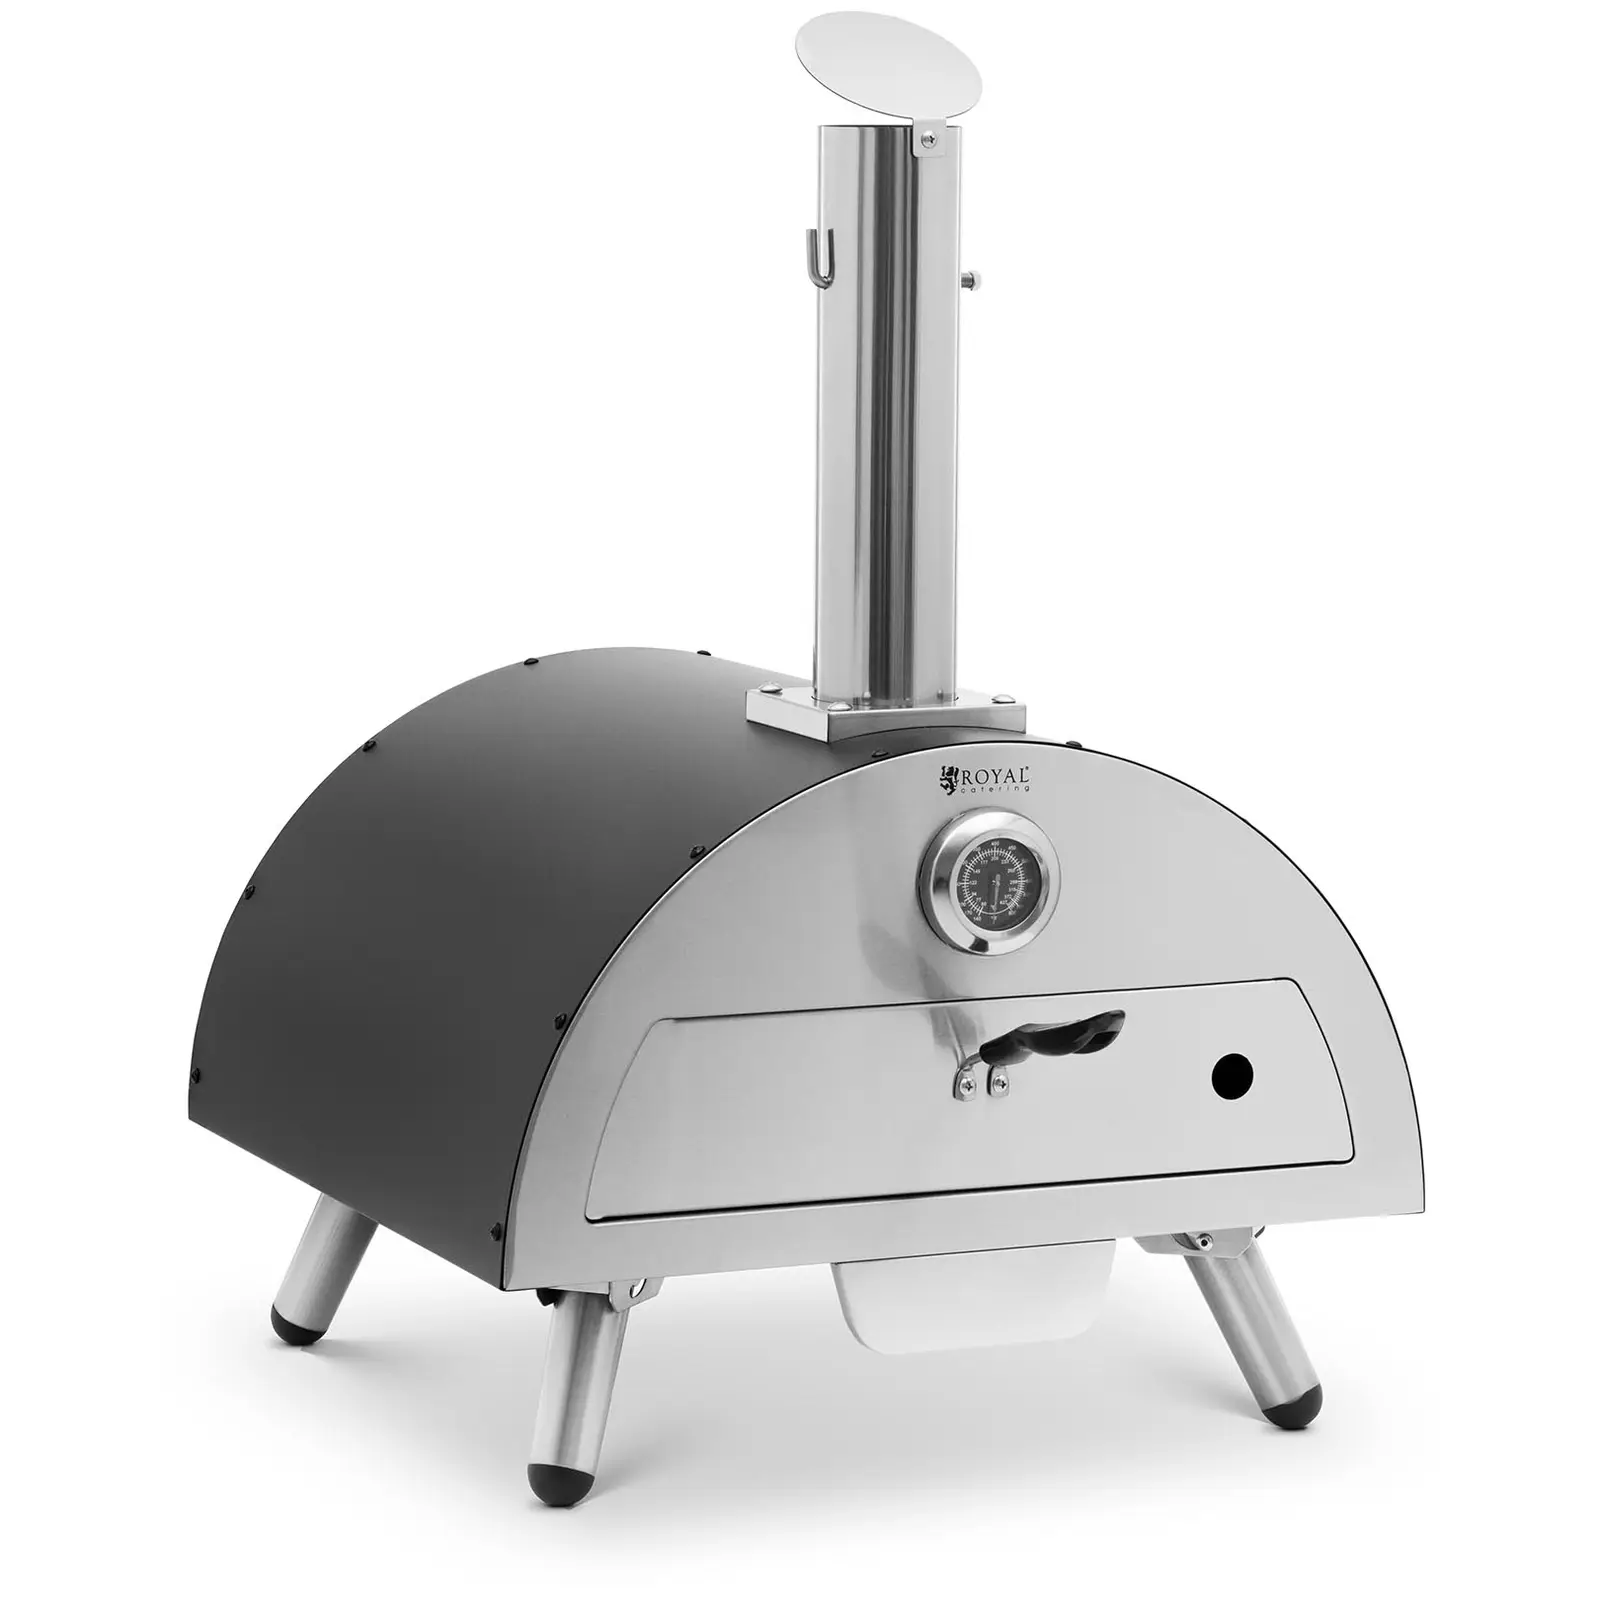 Wood Fired Pizza Oven - Cordierite - 190 ° C - Ø 33 cm - Royal Catering